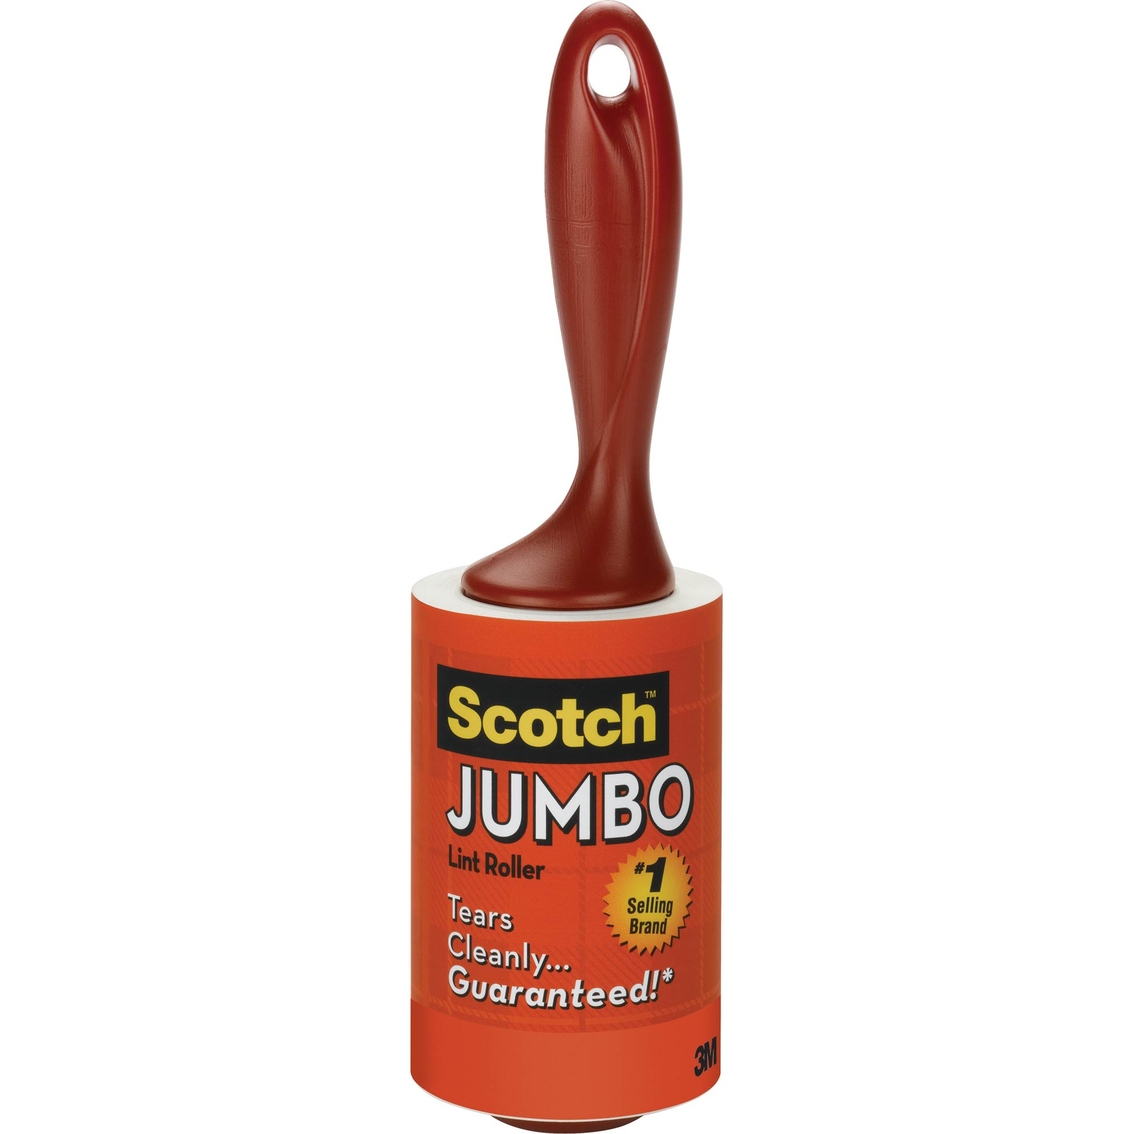 Scotch-brite Jumbo Lint Roller | Other Laundry Care | Household | Shop ...